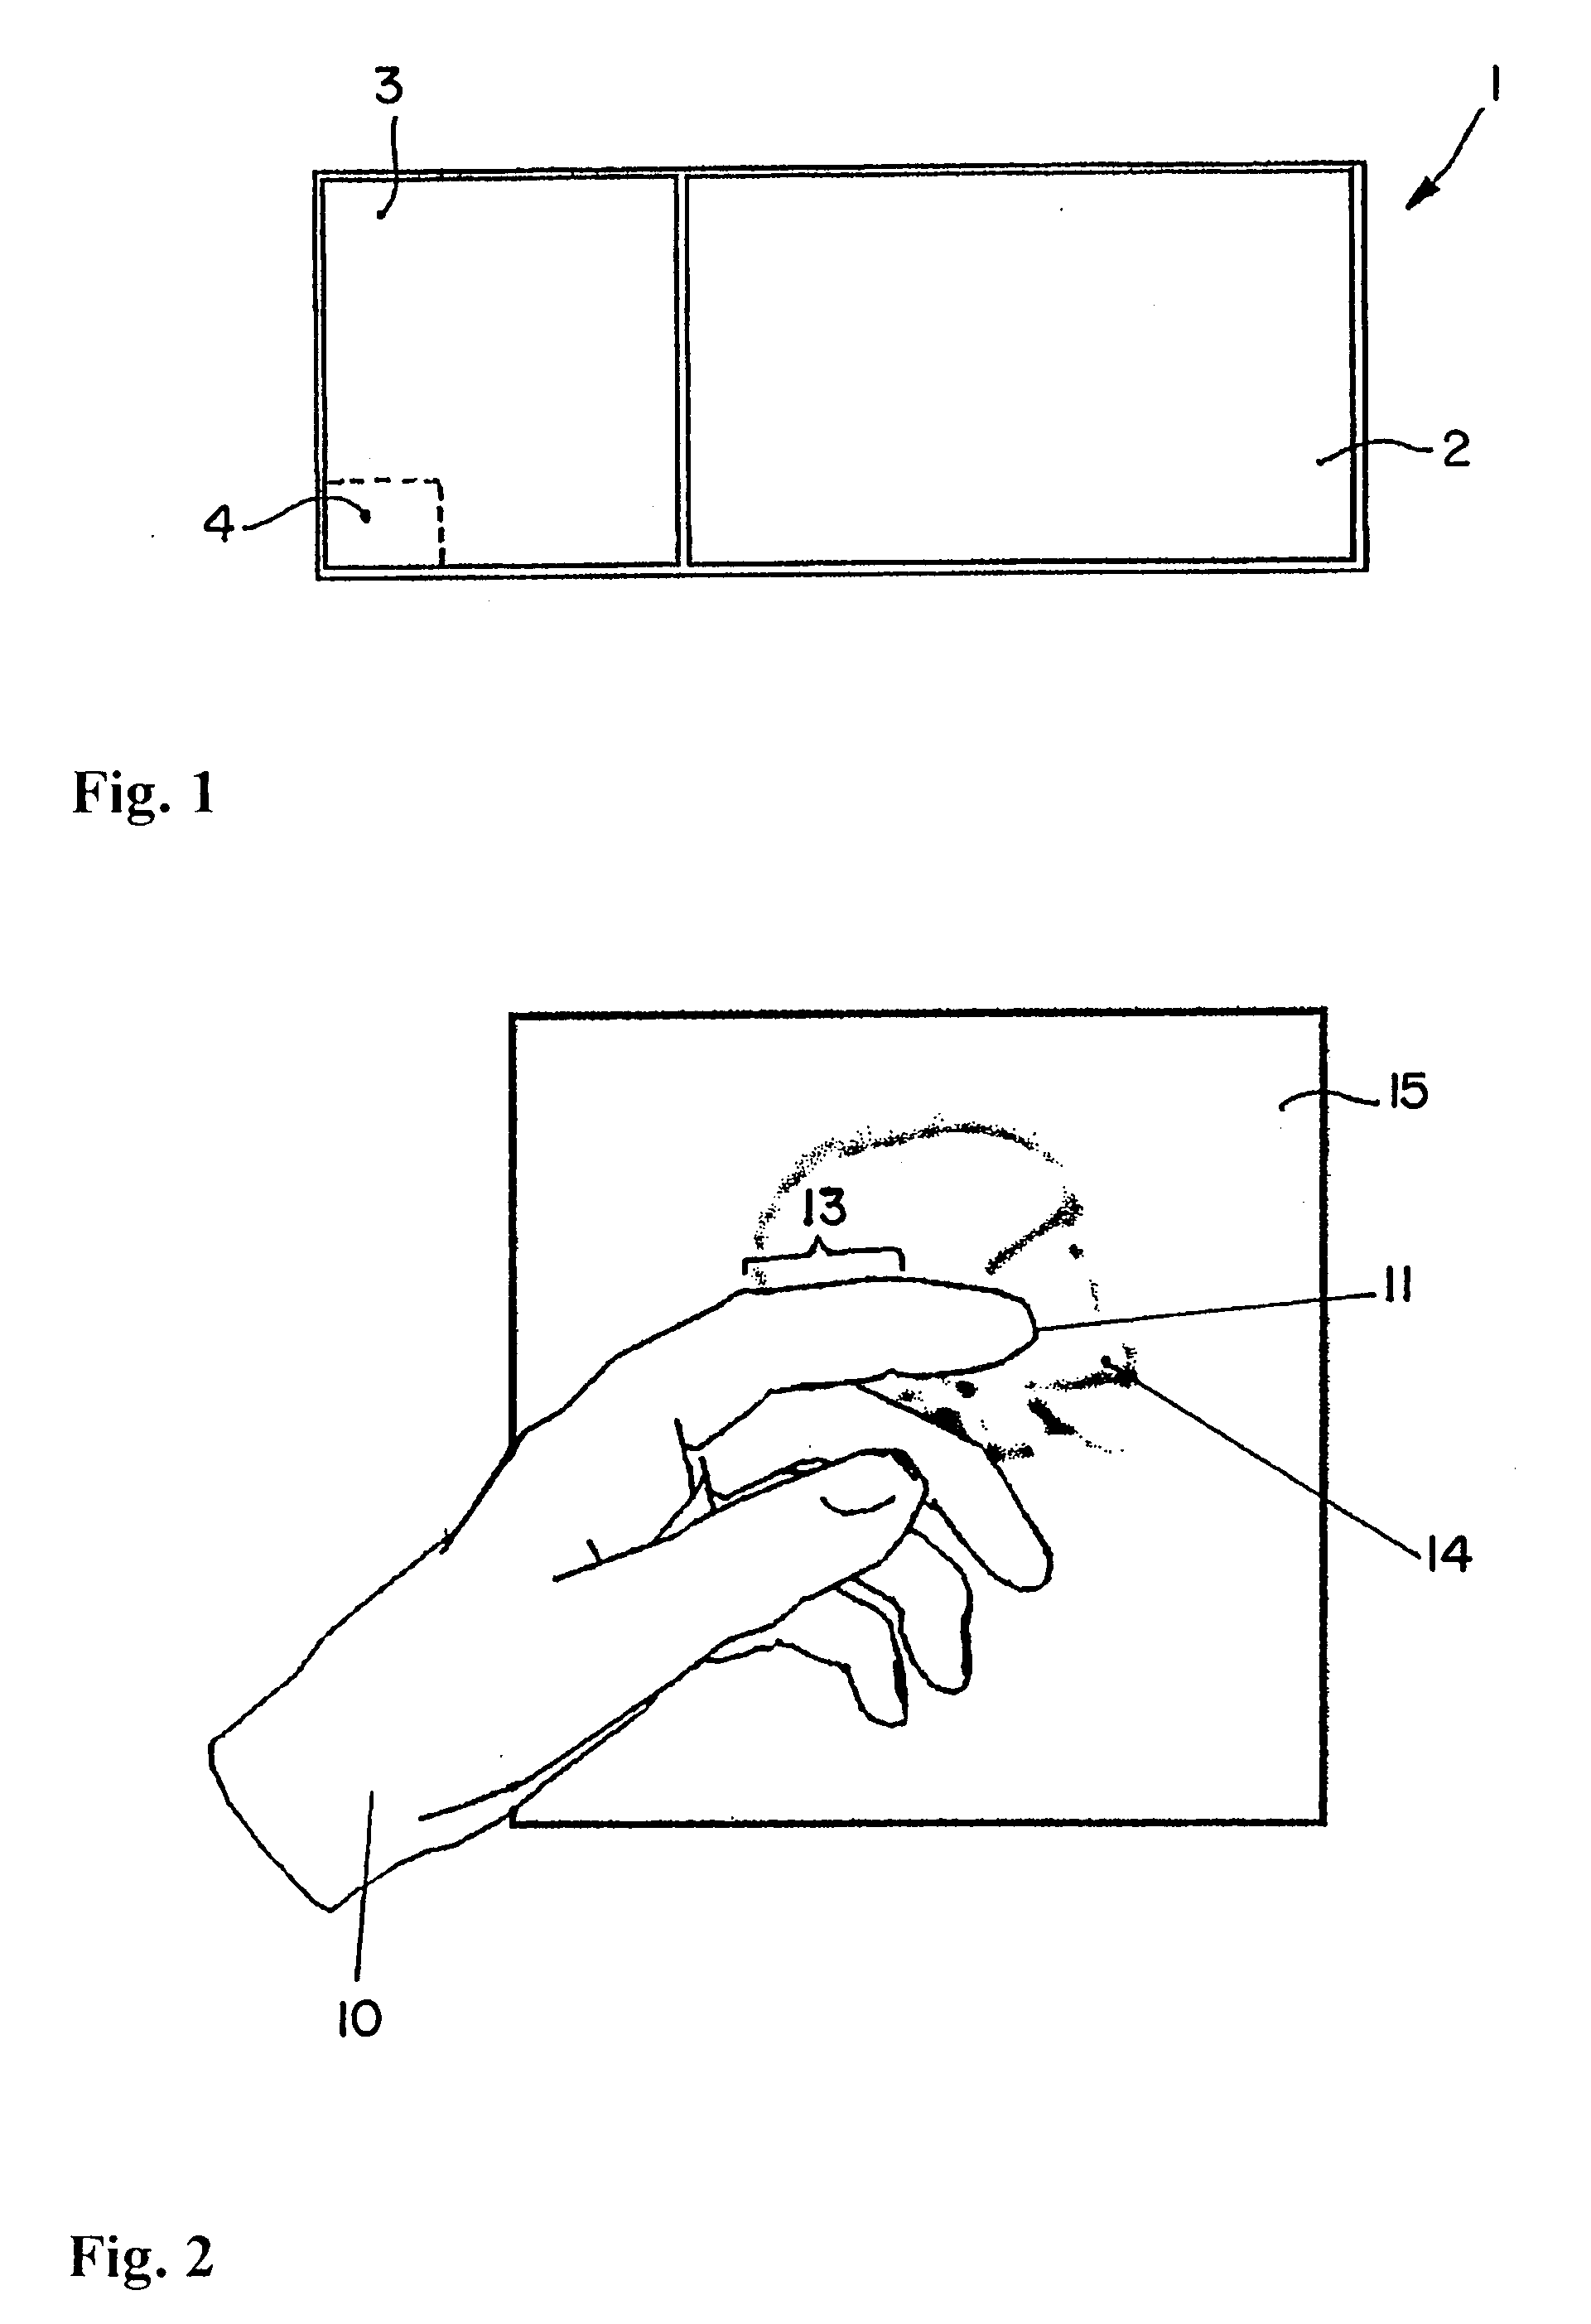 Method for displaying and/or processing image data of medical origin using gesture recognition